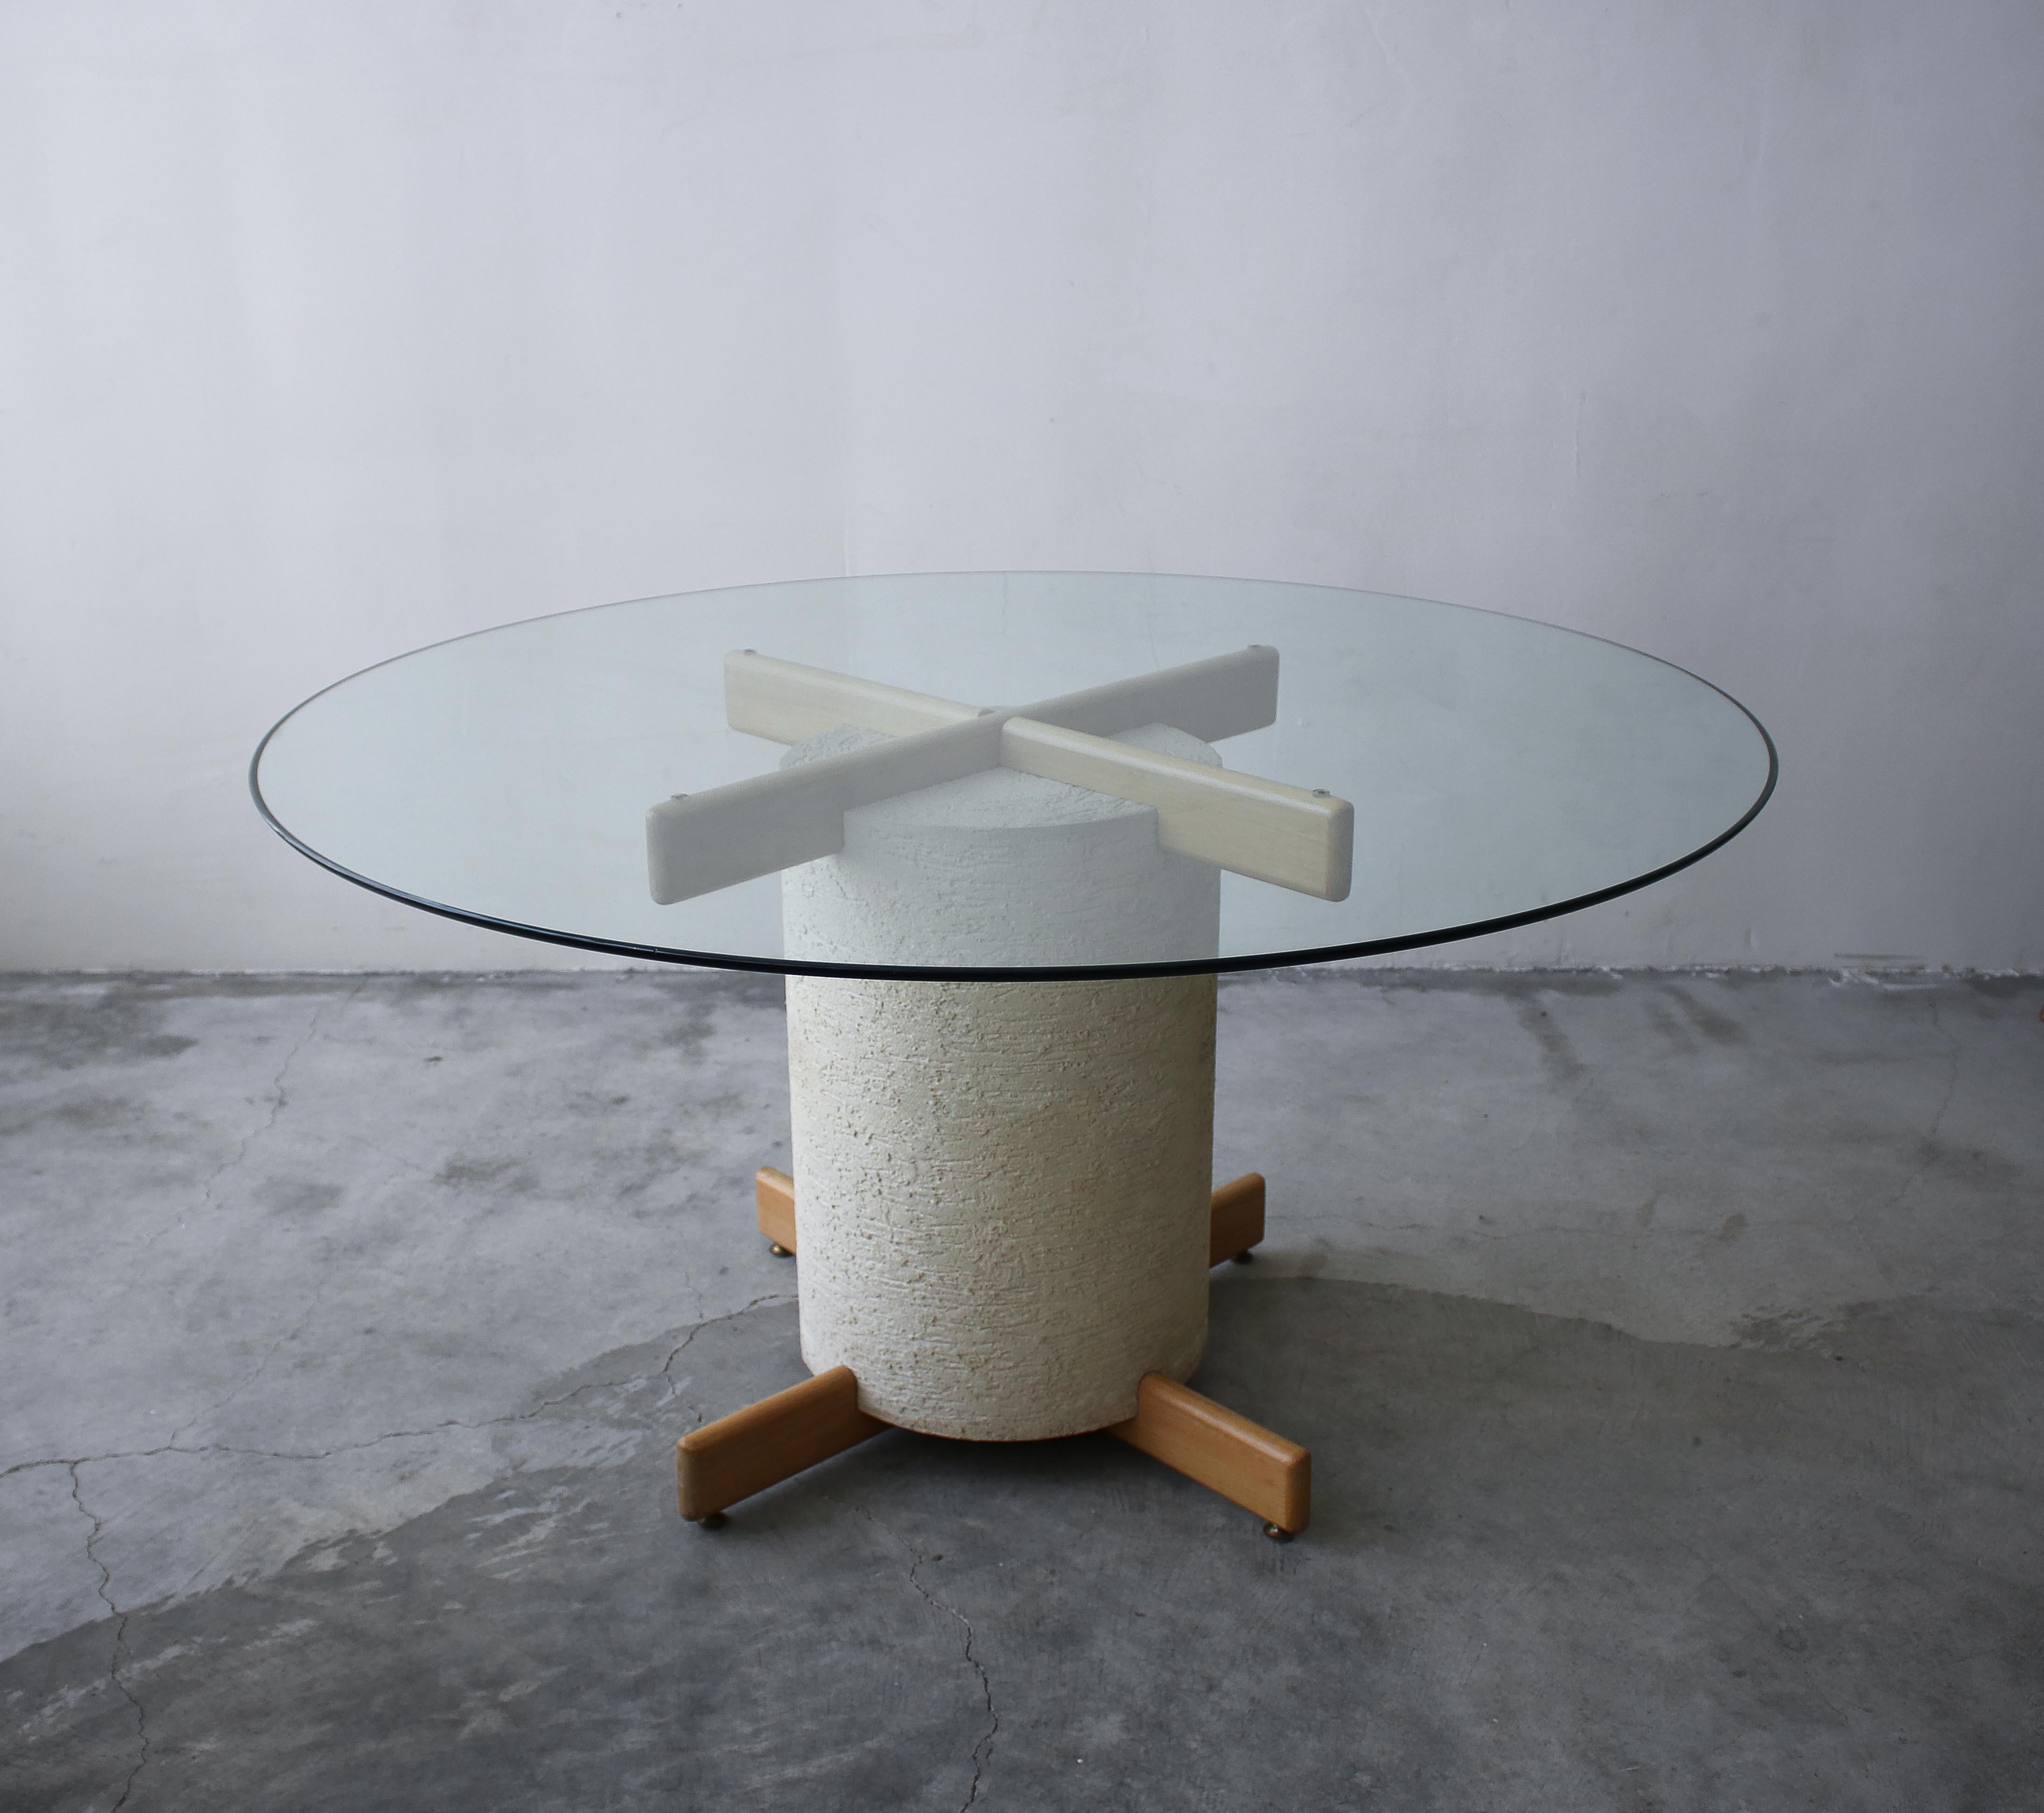 Great Postmodern dining table base constructed of oak and stucco. A great Minimalist design, perfect for a small dining space or nook. Would also make a great store fixture.

Table is in excellent condition. 

Shown with a 48